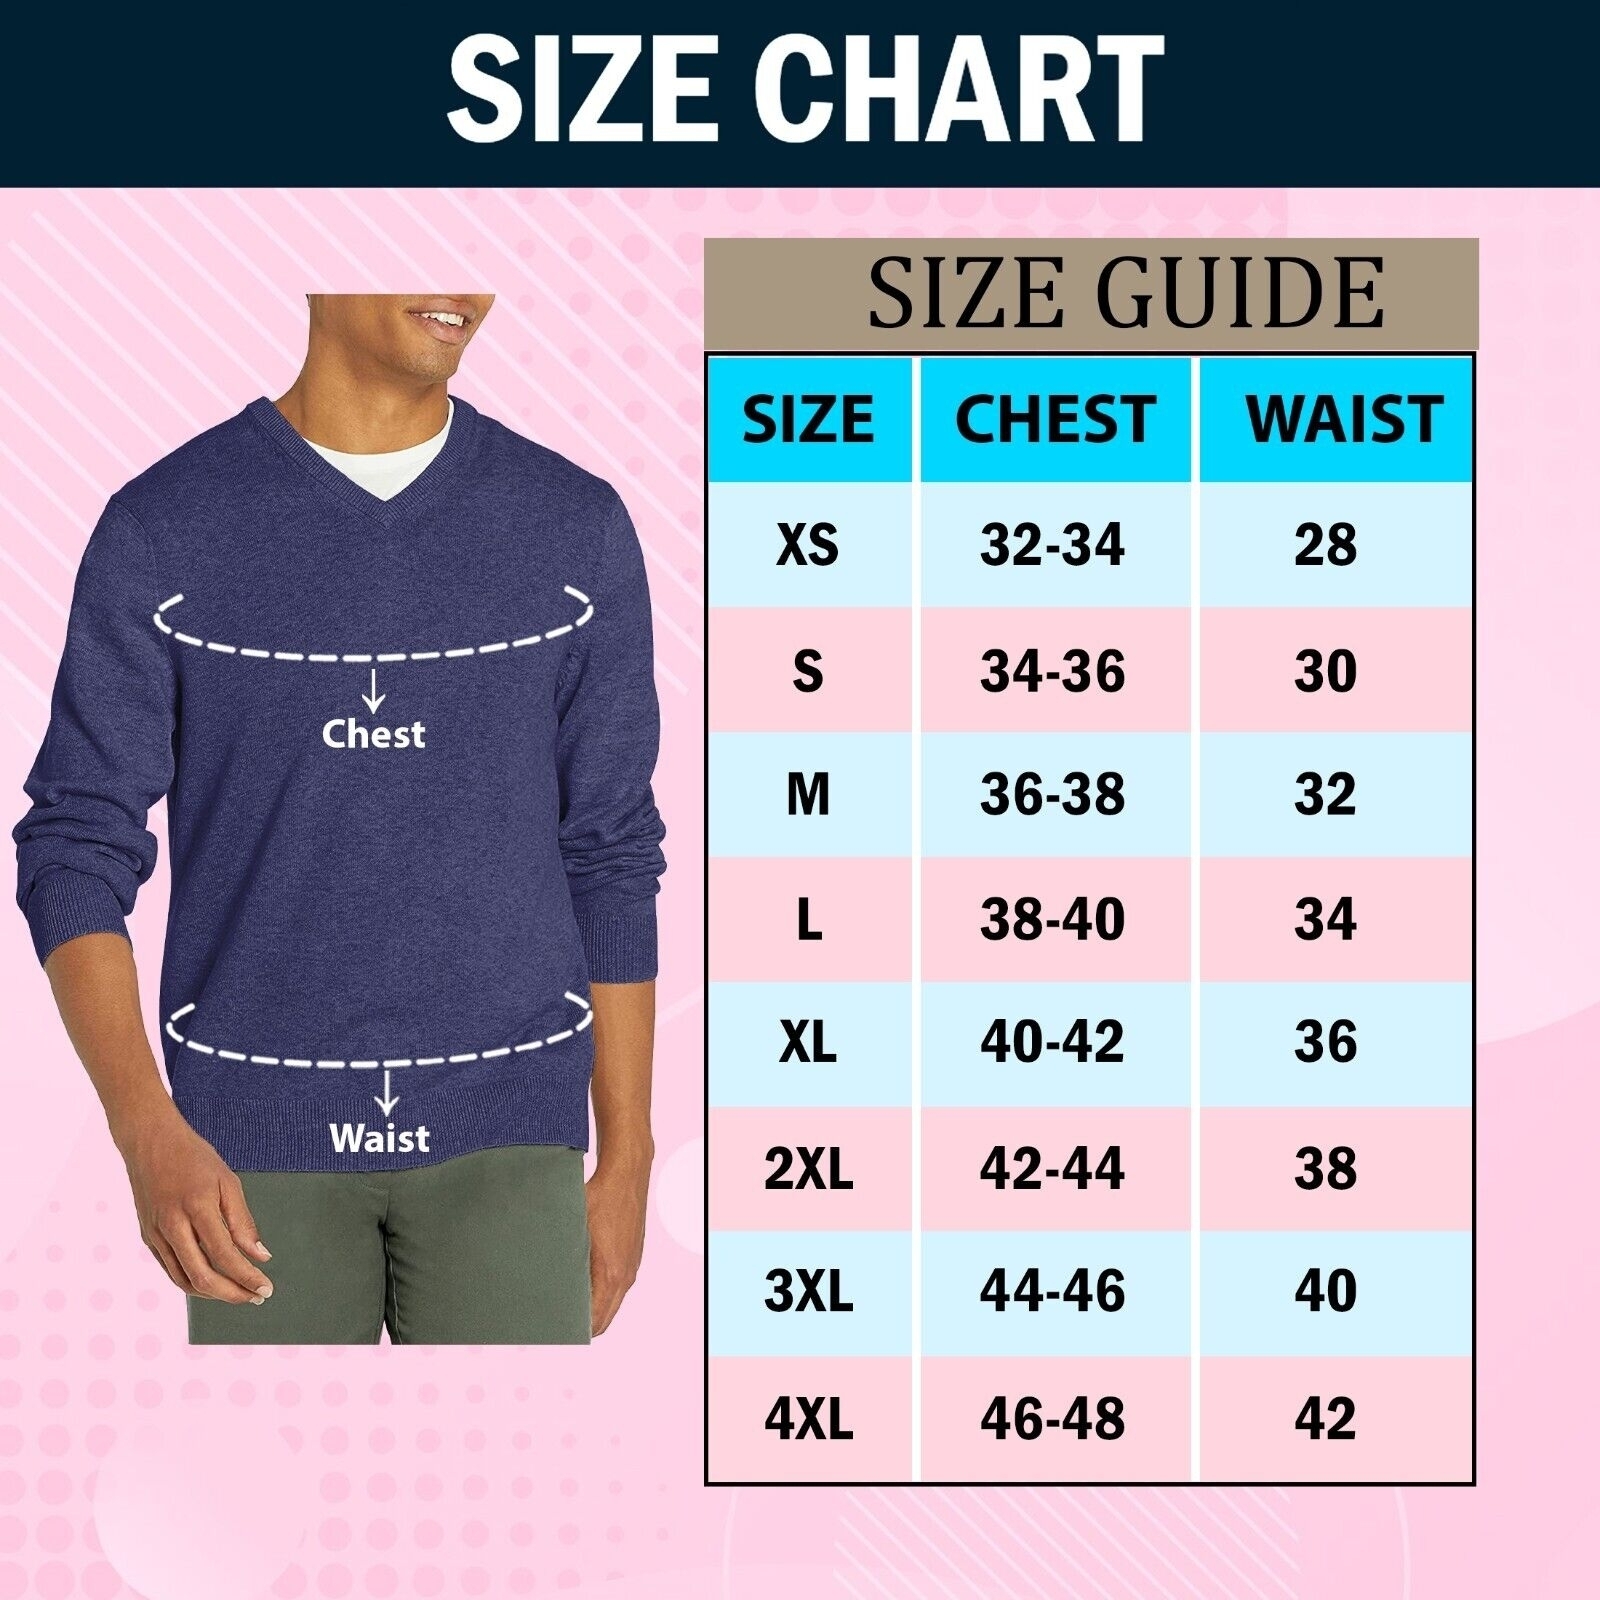 Multi-Pack Mens Cozy Comfy Ultra Soft Slim Fit Warm Knit Pullover V-Neck Sweater - 2, X-Large